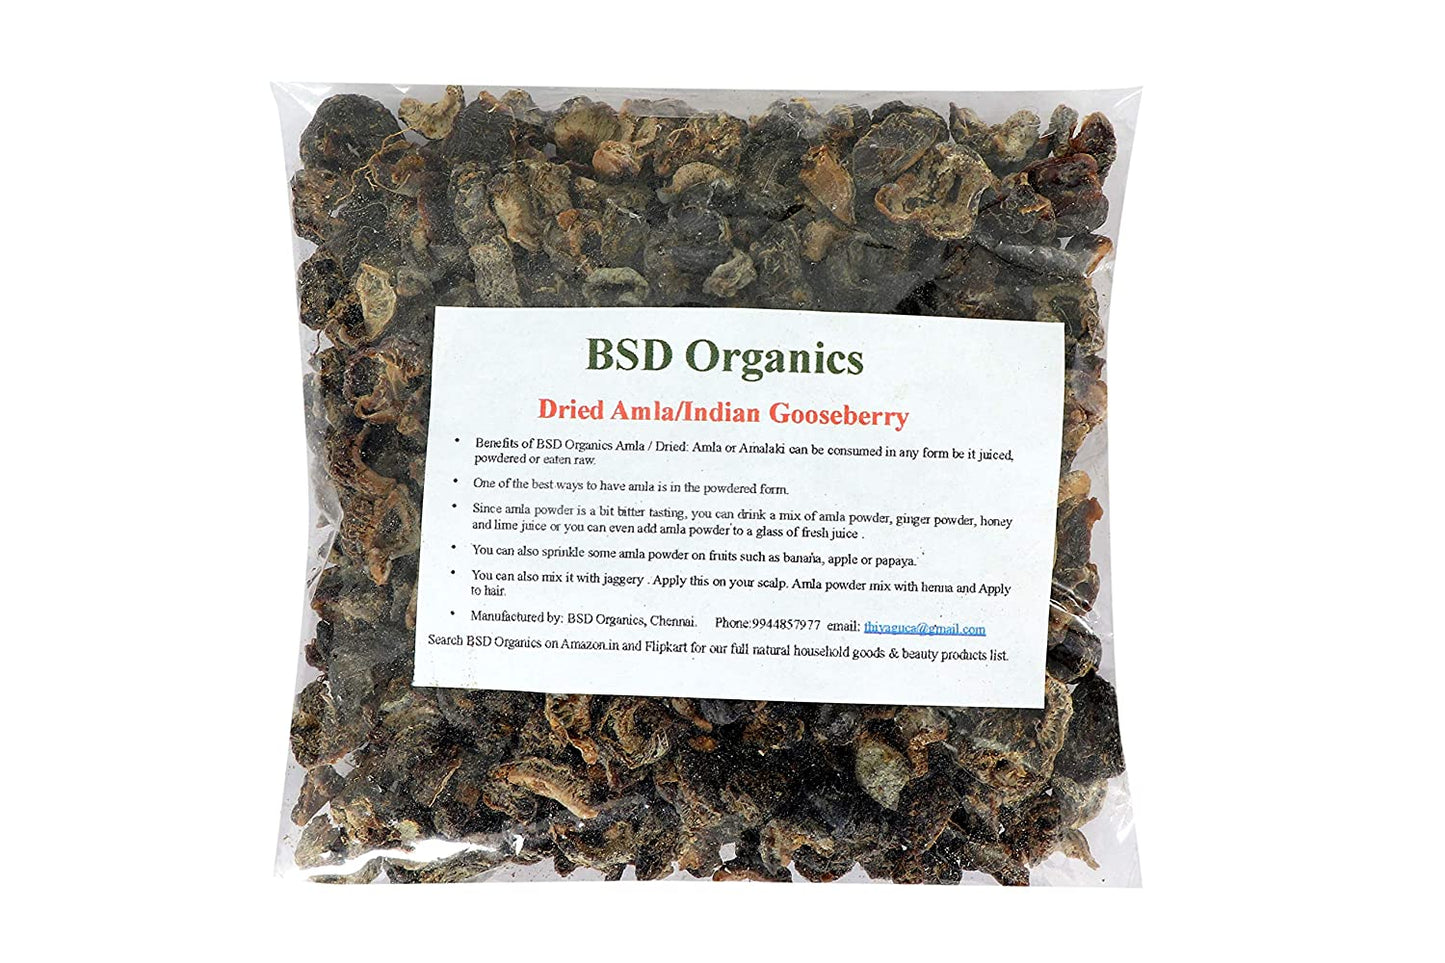 BSD Organics Dried Amla/Indian Gooseberry/Amalaki for Tea,Drink,Hair pack and more -500grams